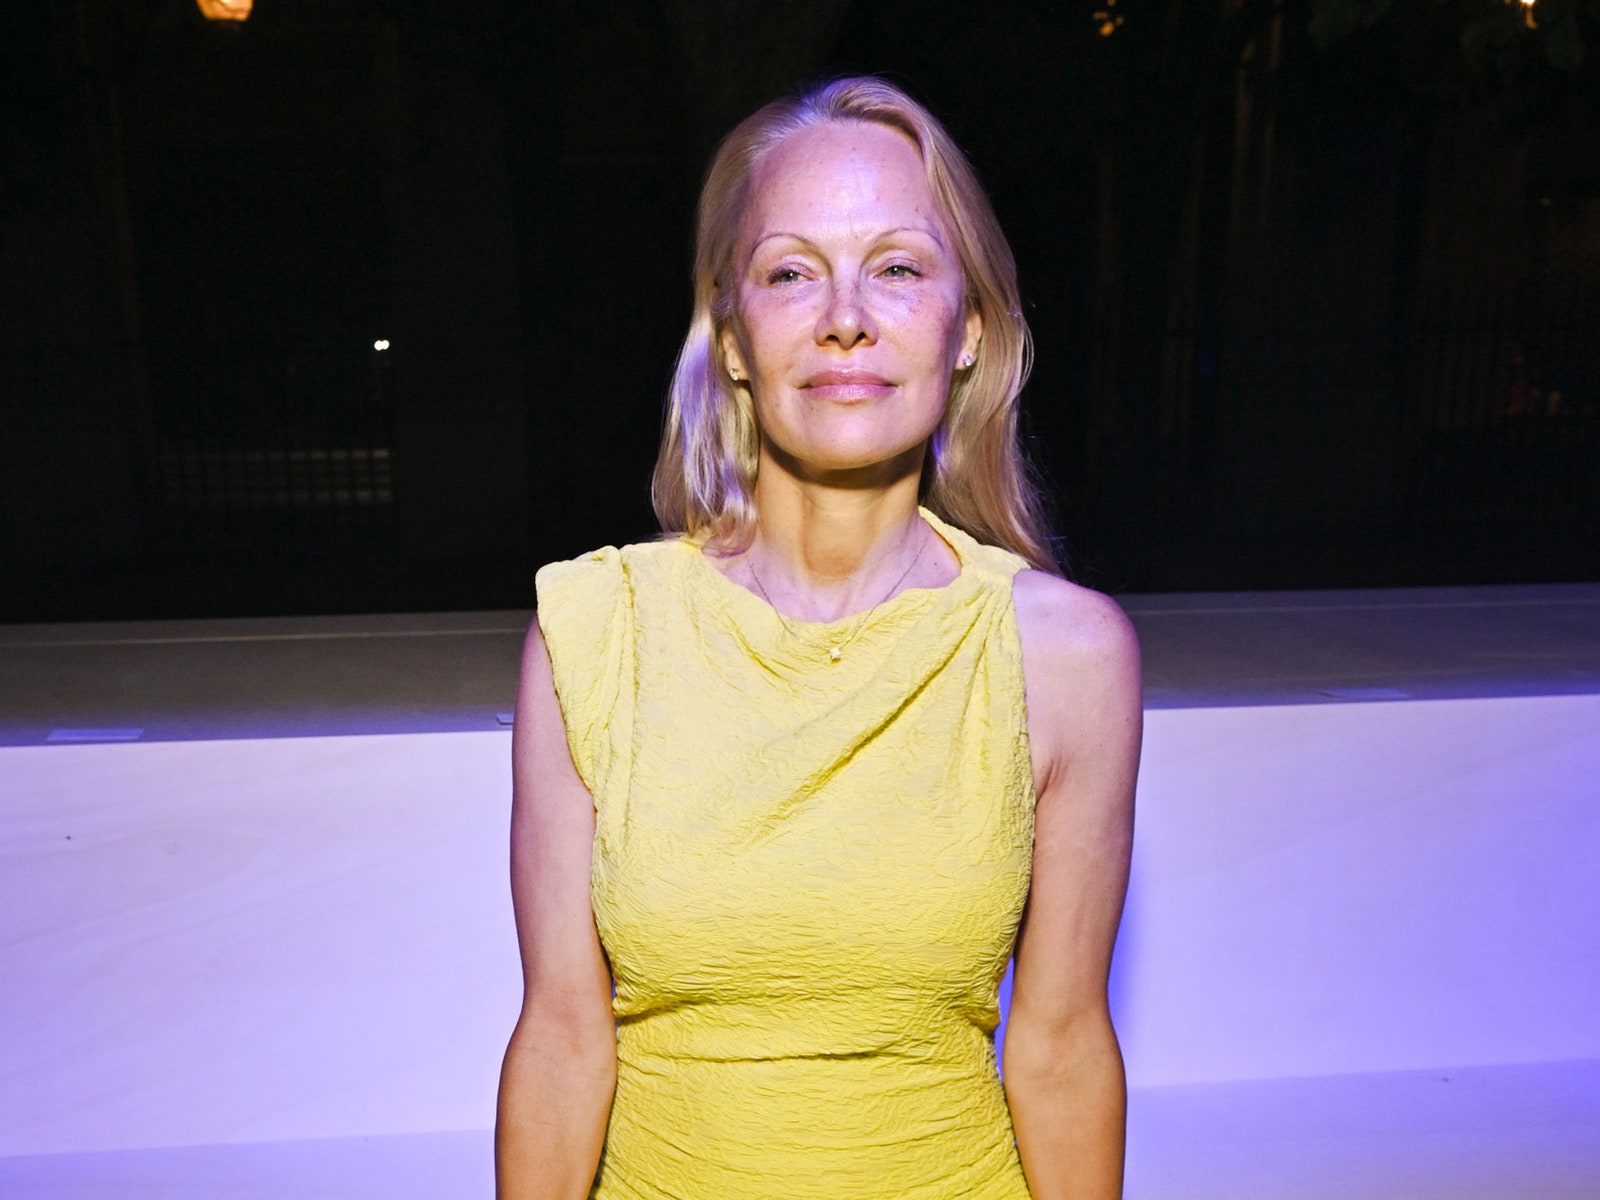 Every time Pamela Anderson has gone makeup-free